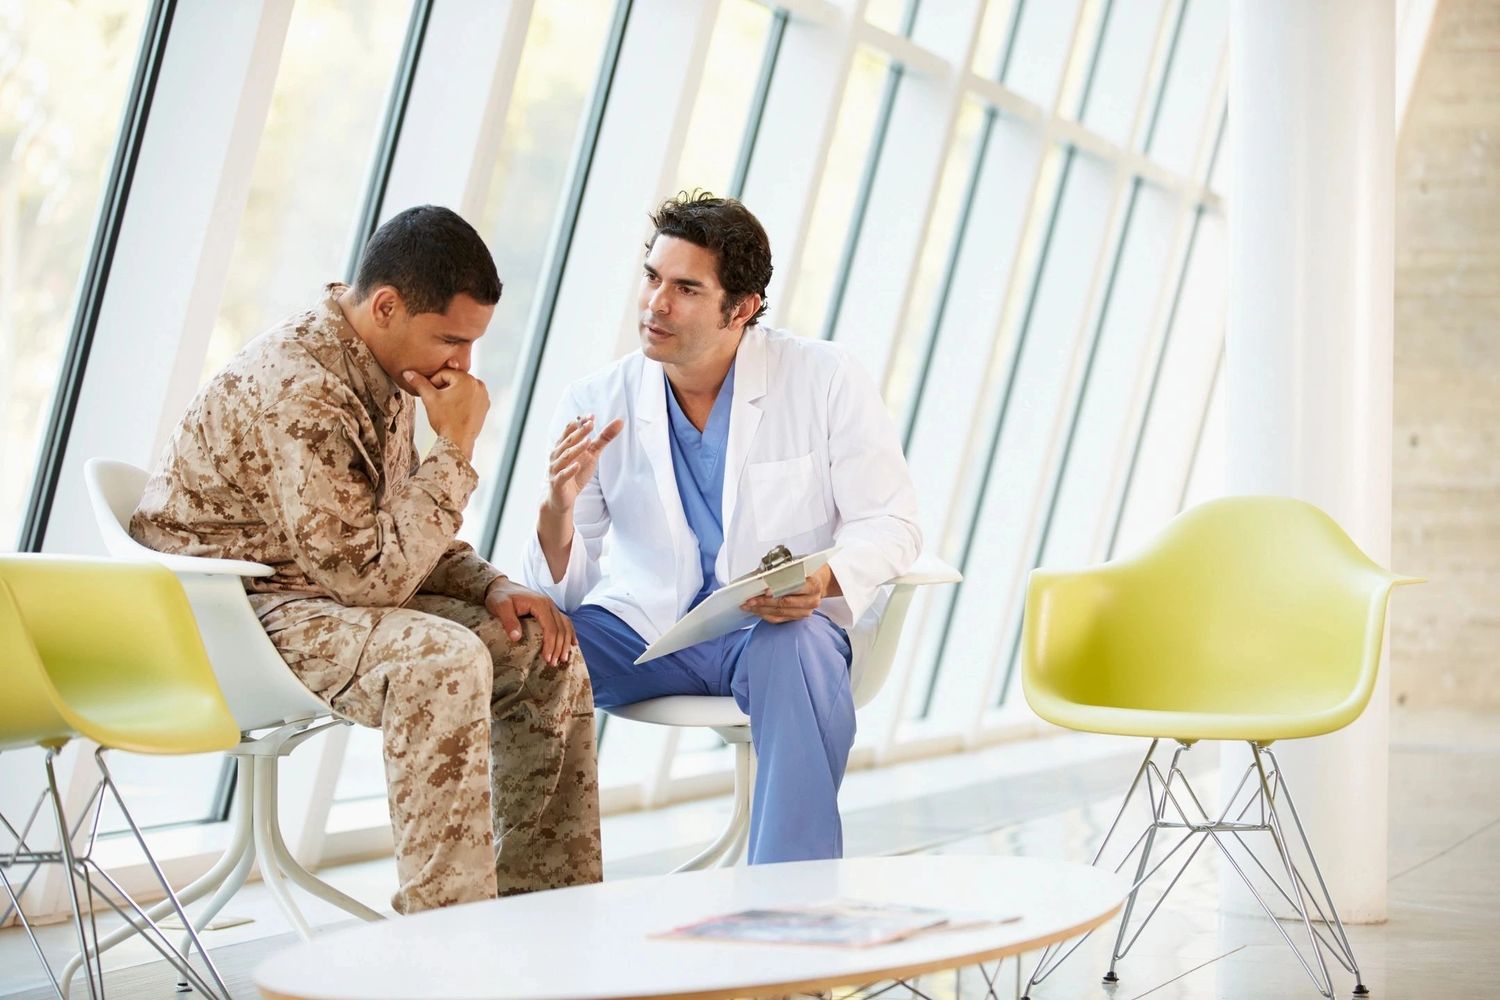 Male Doctor Offering Counselling To Depressed man
